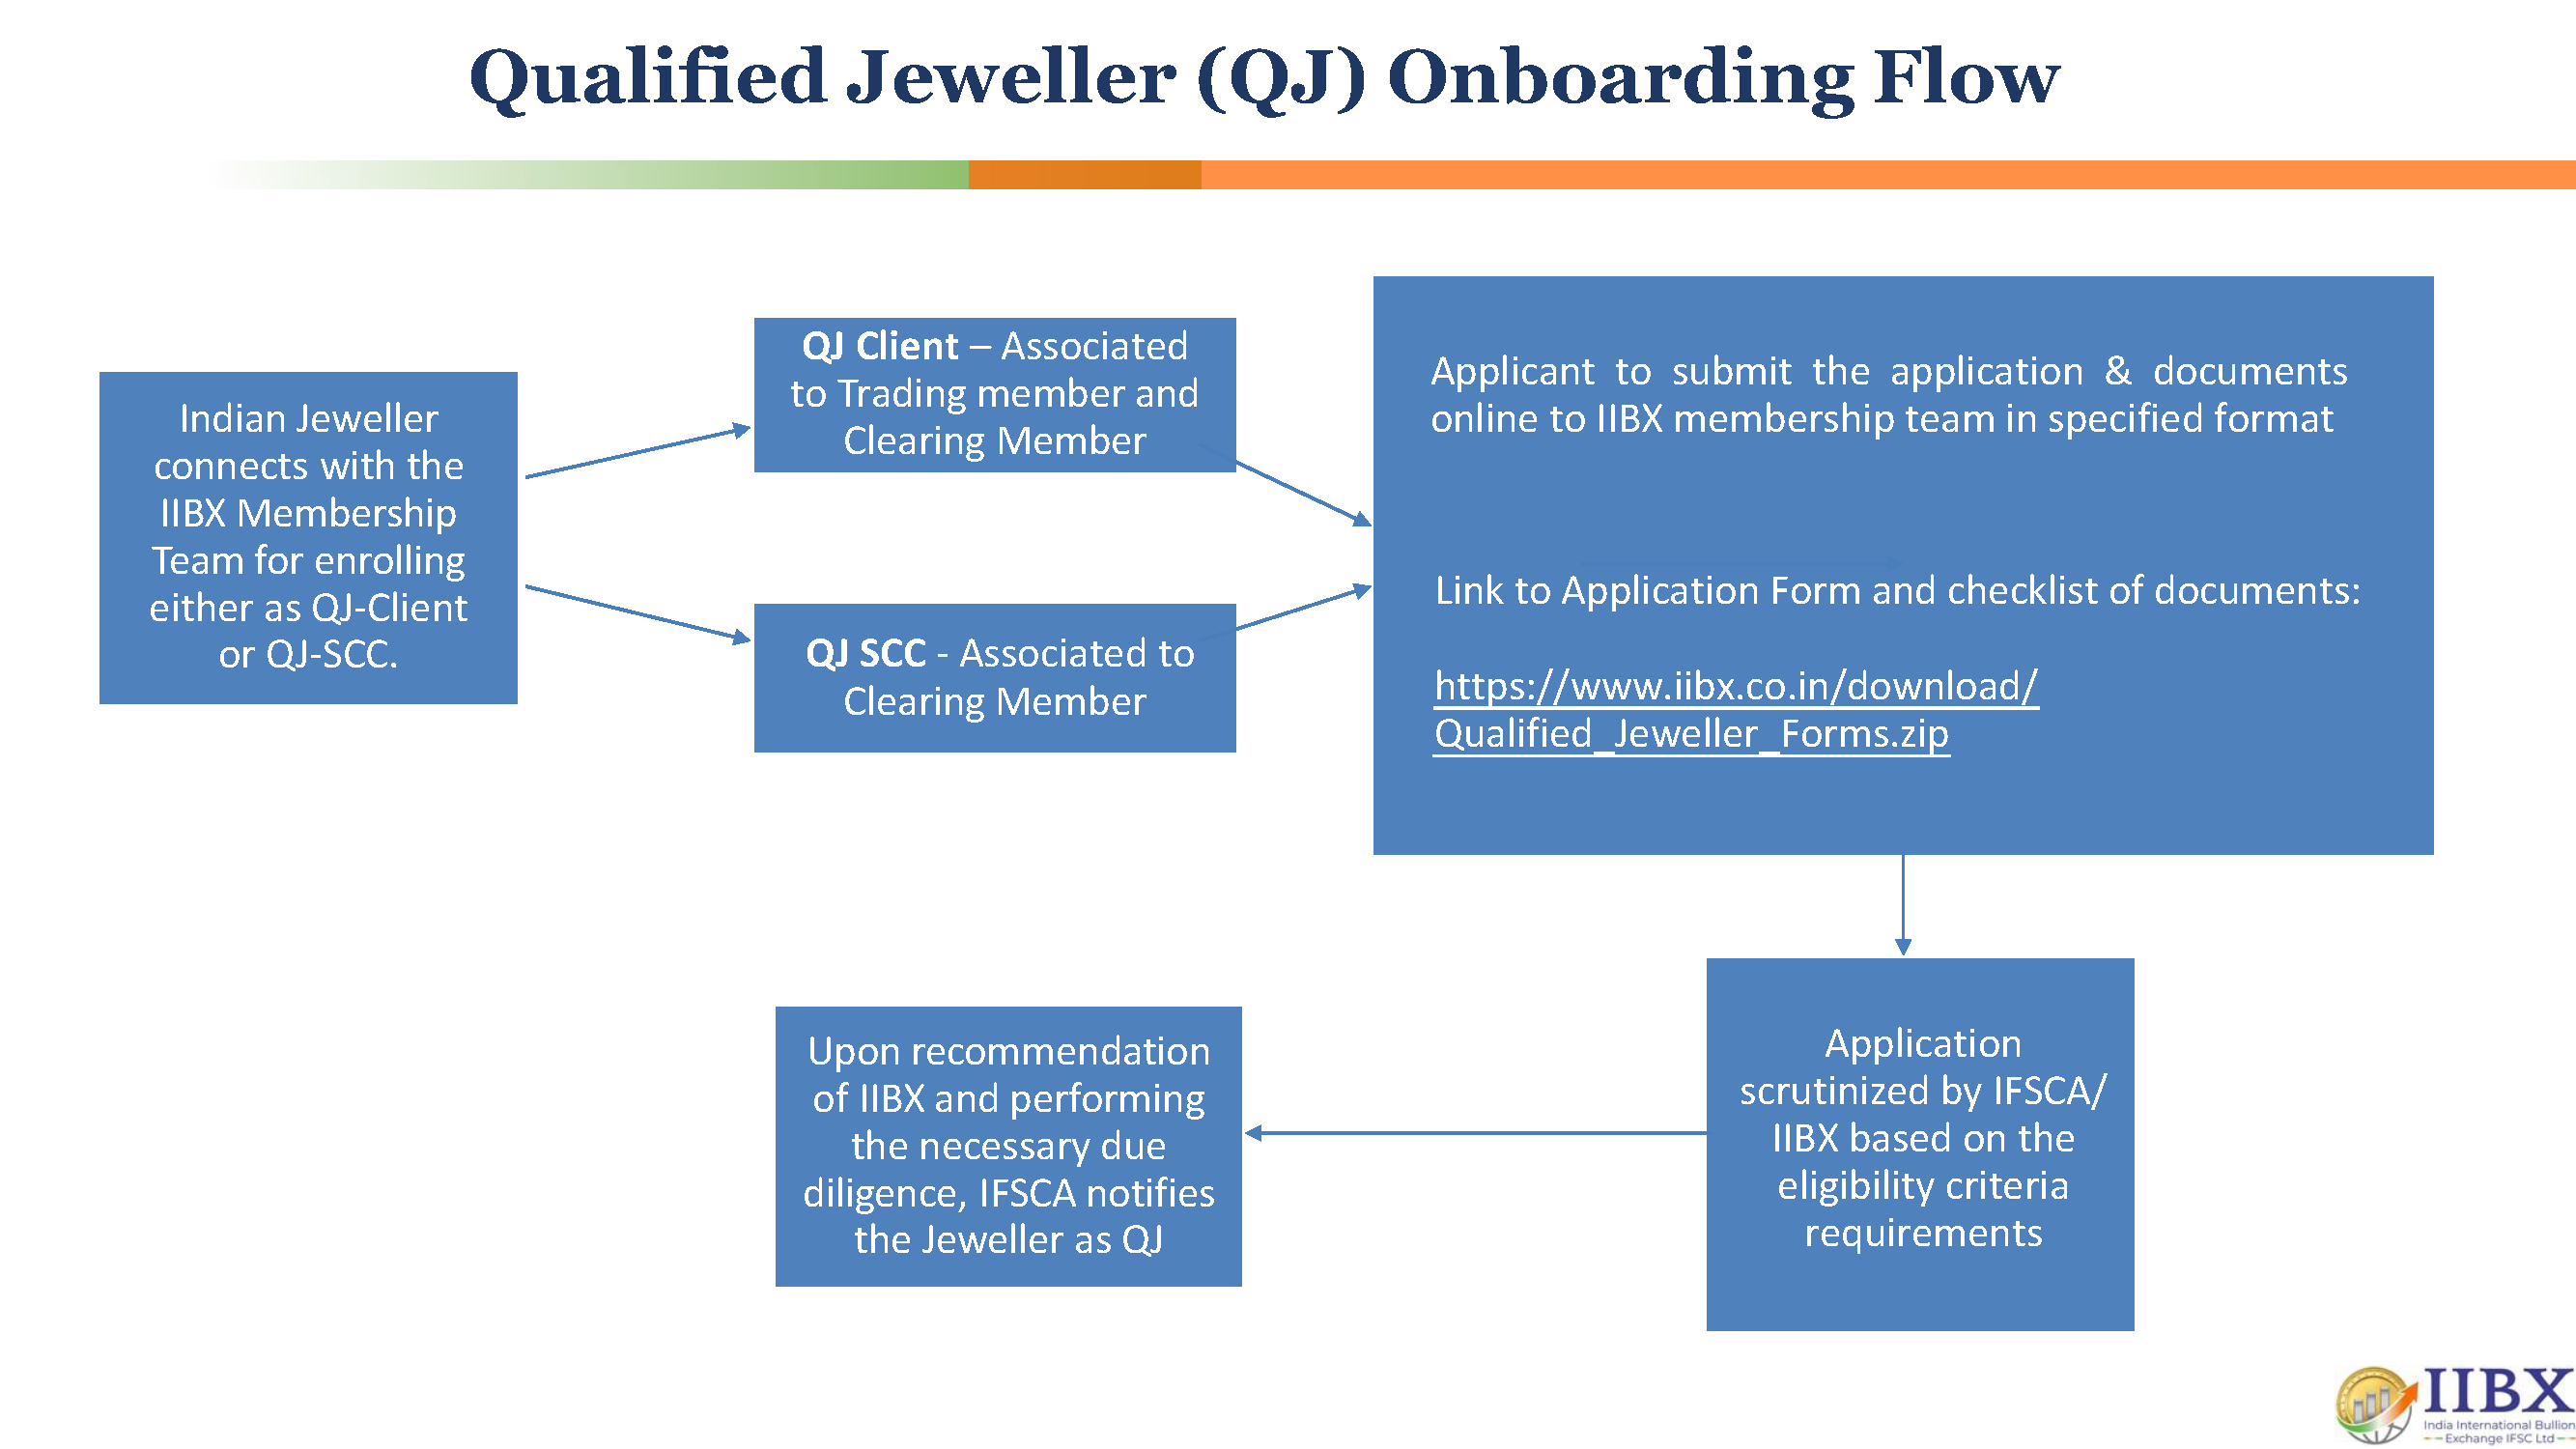 Qualified Jewellers (QJ) Onboarding Flow